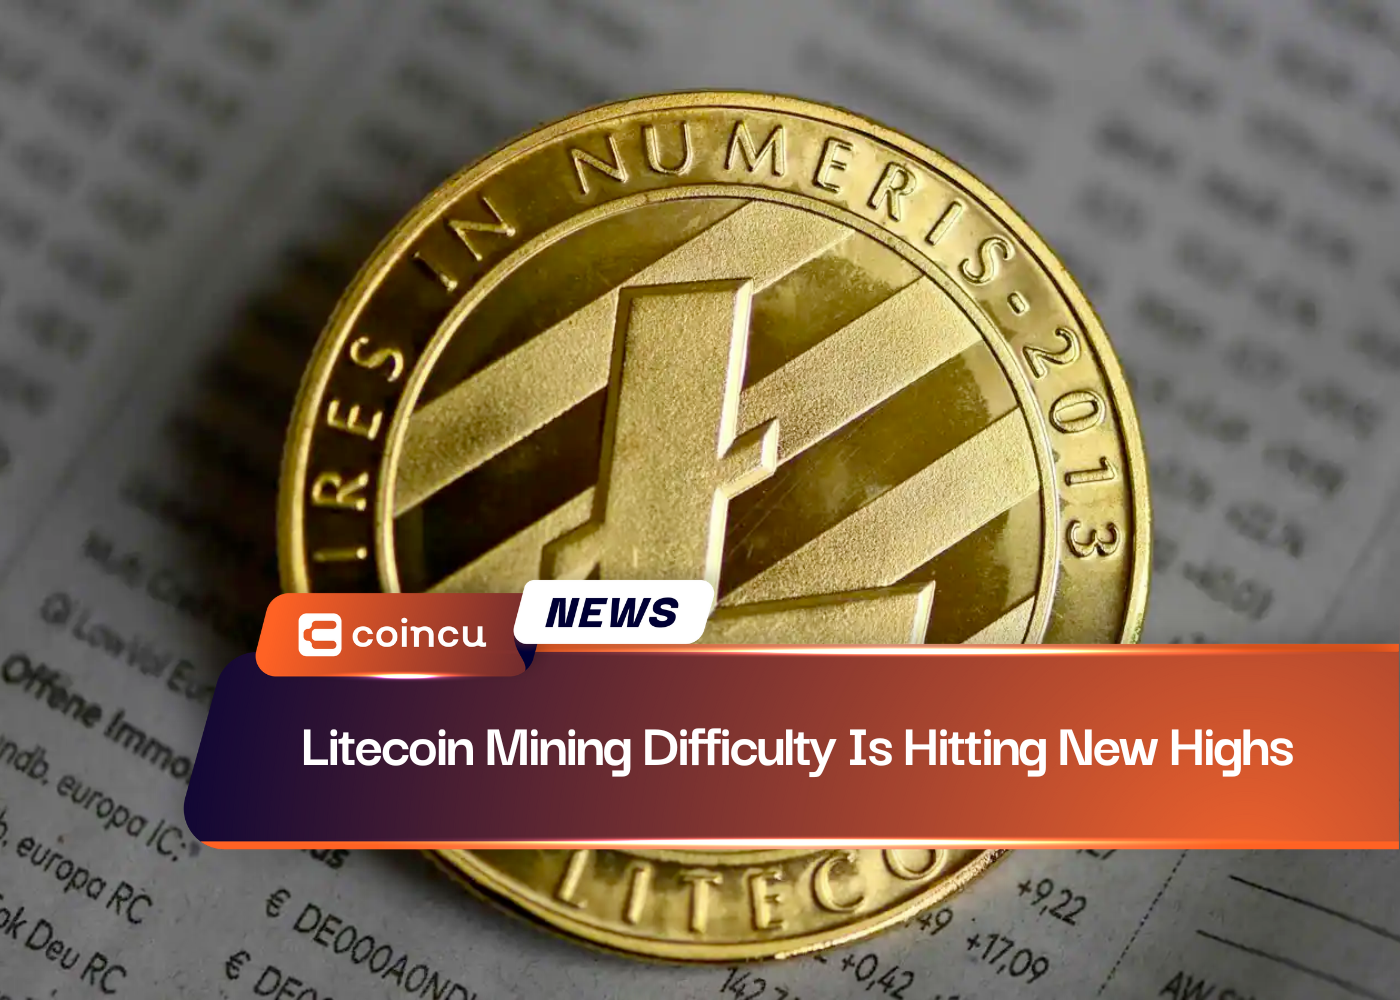 Litecoin Mining Difficulty Is Hitting New Highs